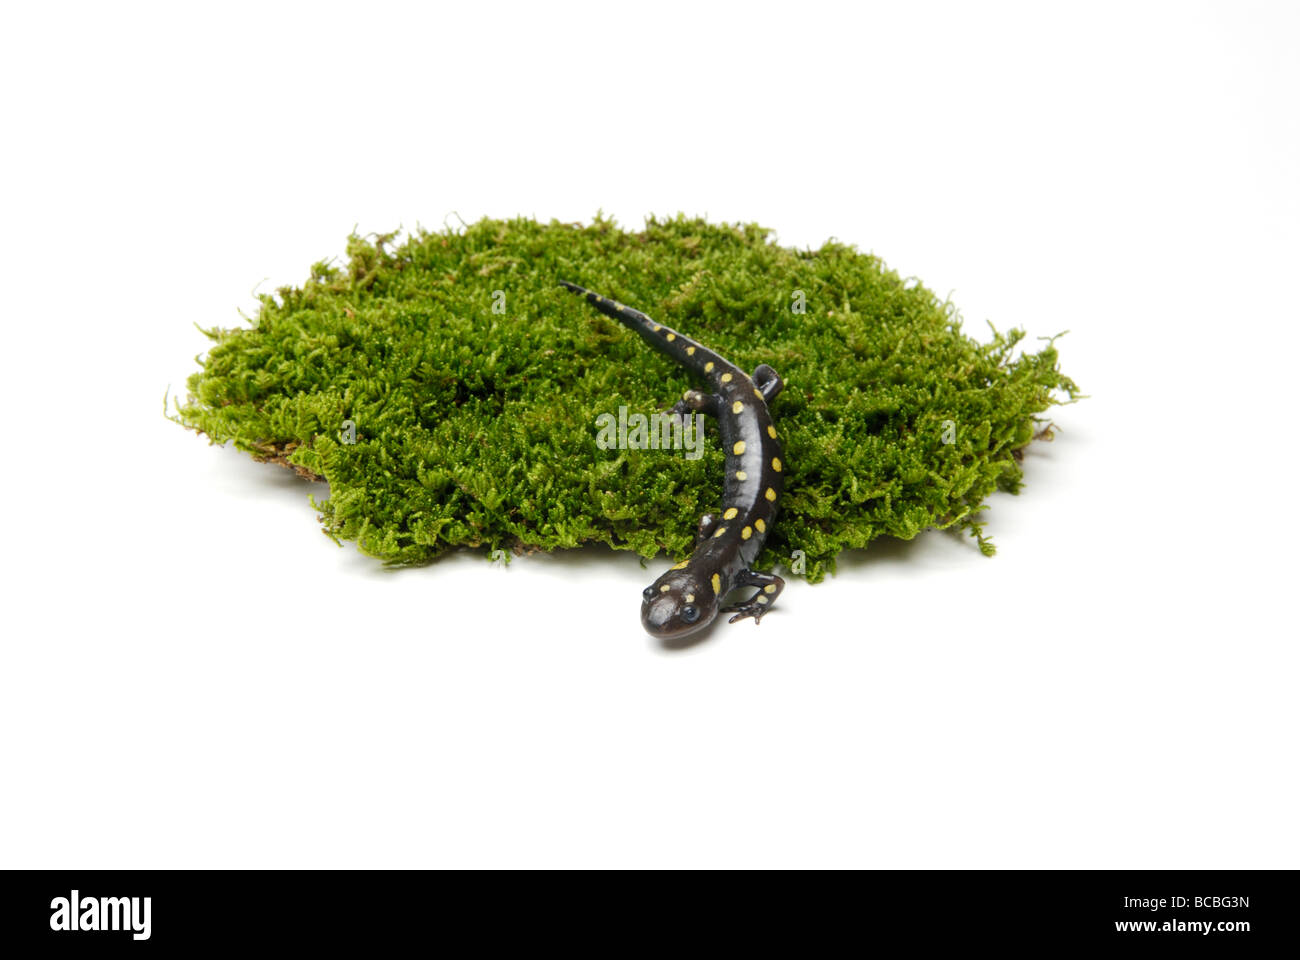 Spotted salamander Ambystoma maculatum on an island of moss. The moss is an oasis of habitat for the salamander. Stock Photo